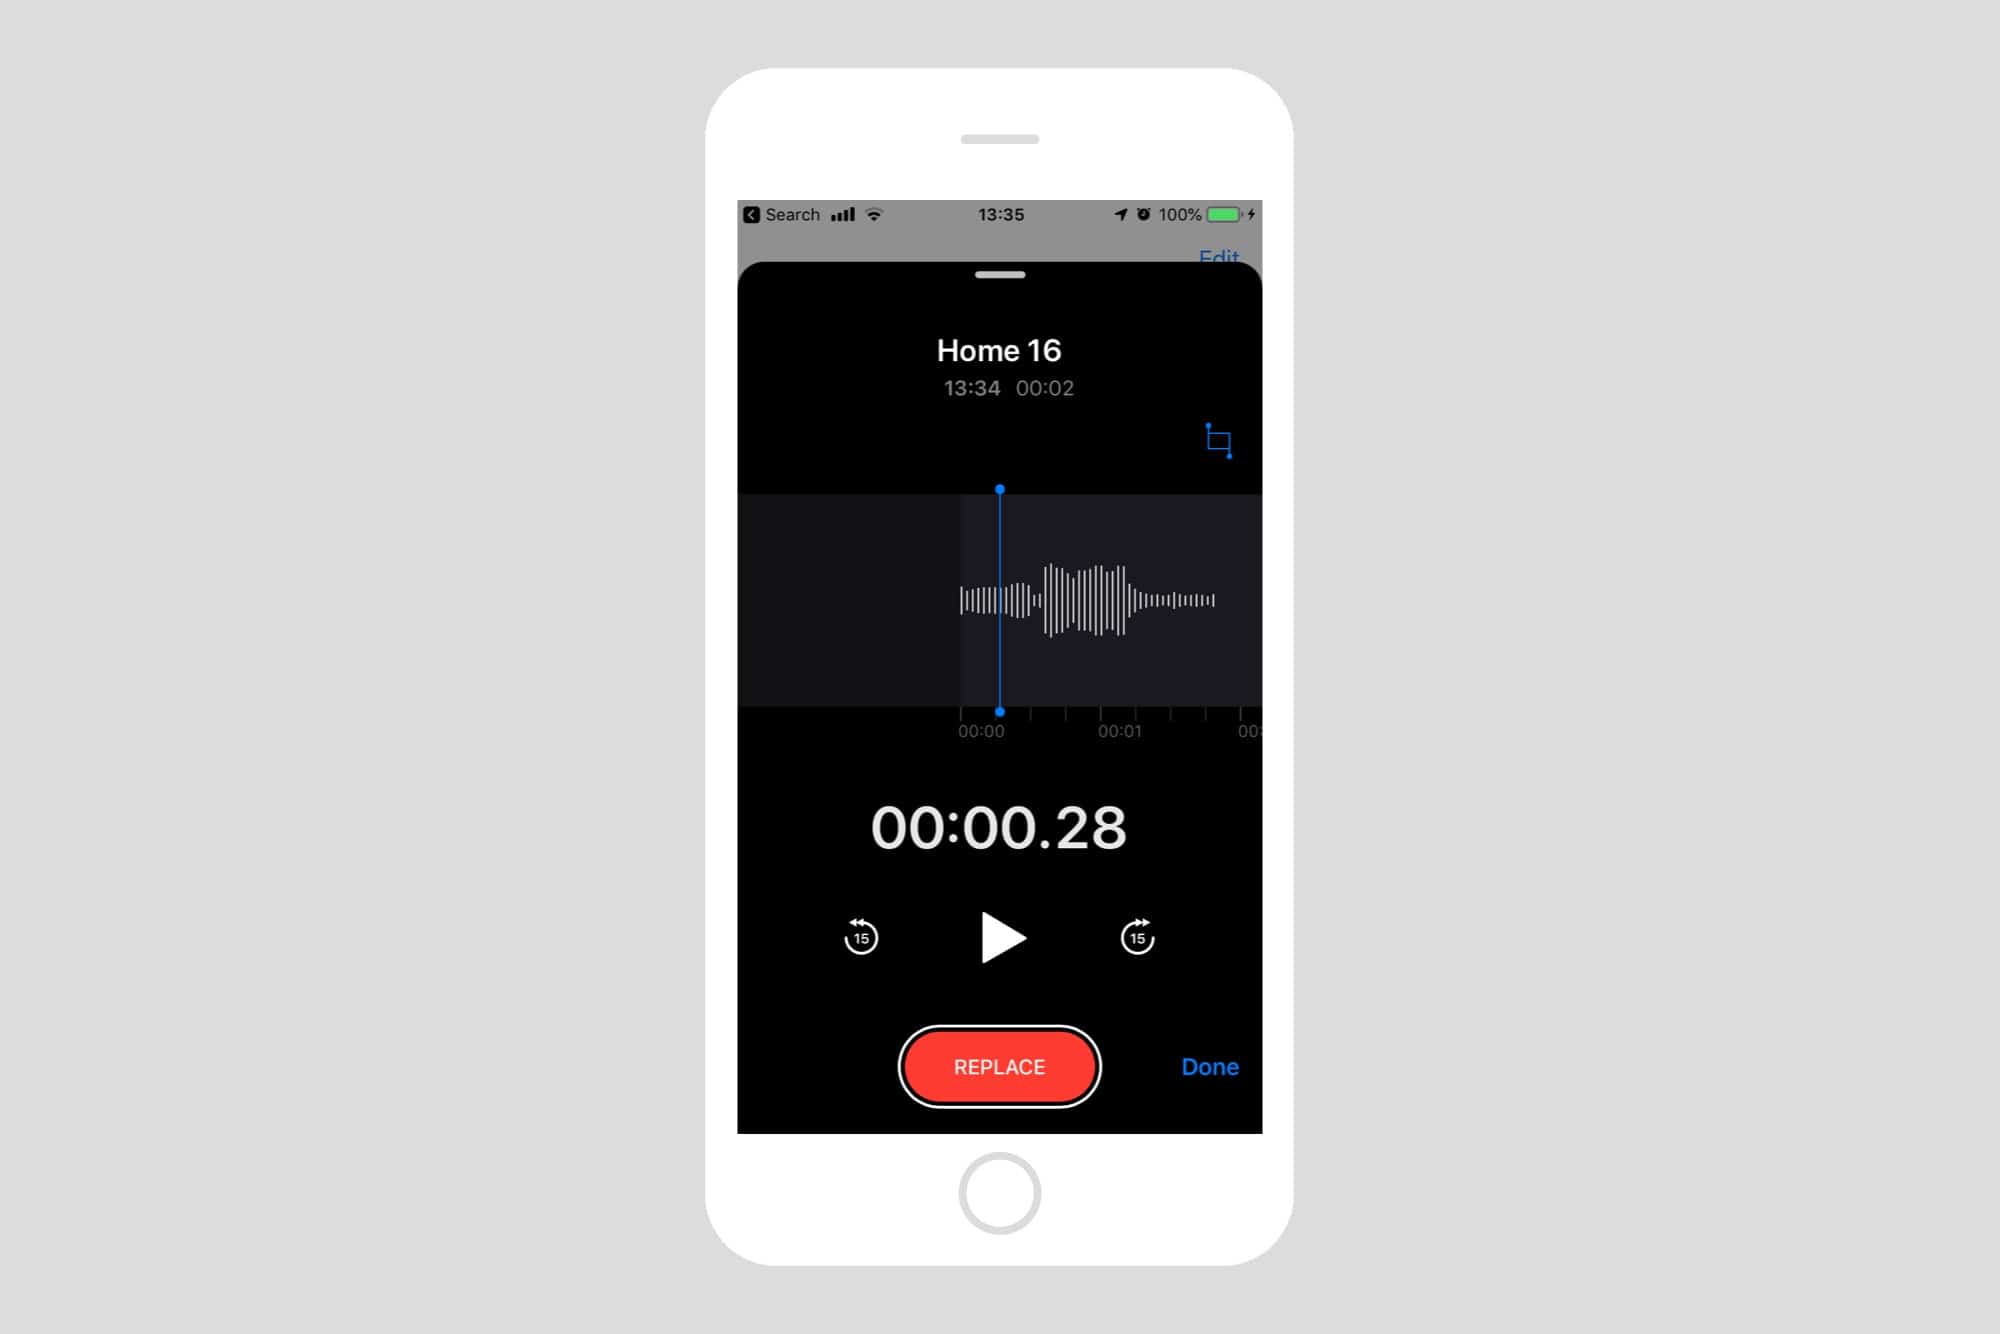 How to use the amazing new iOS 12 Voice Memos app | Cult ...